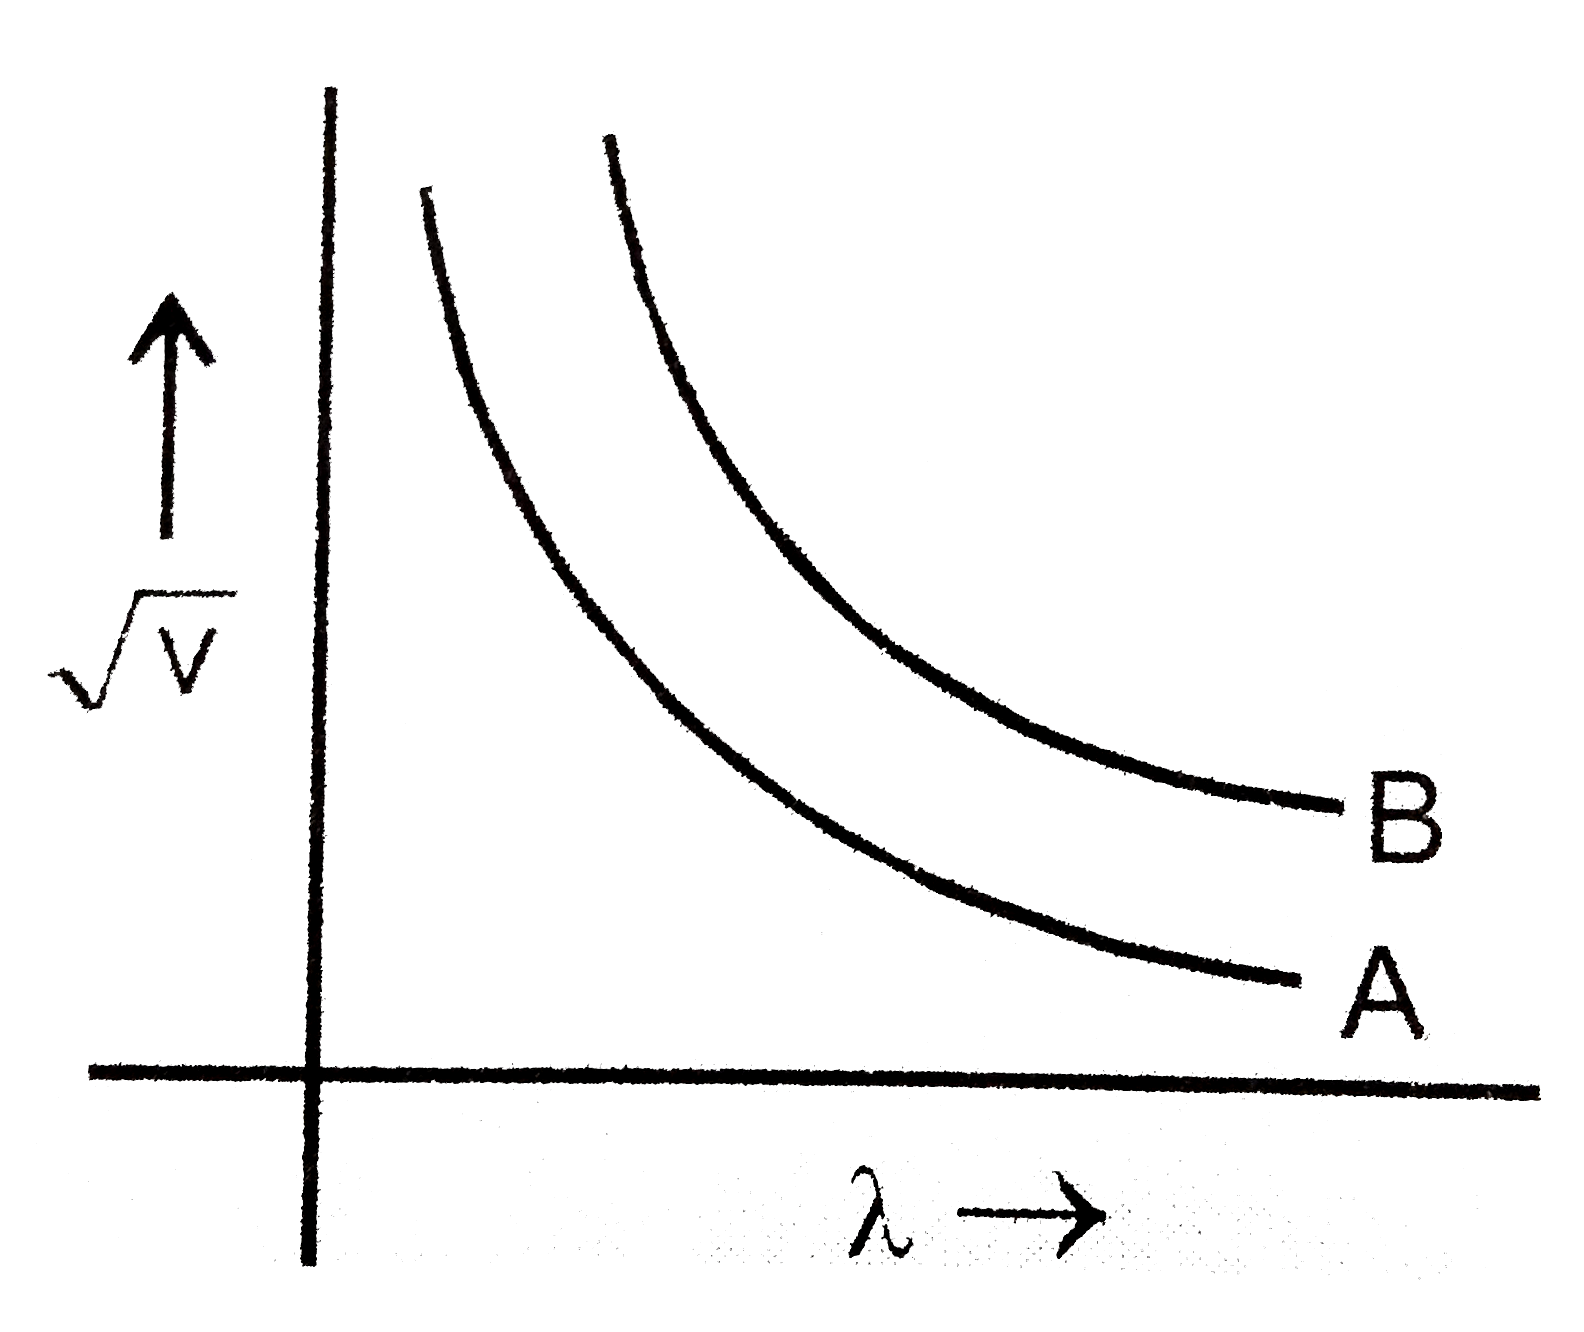 For two particles A and B, curves are plotted sqrtV against de-Broglie wavelengths, where V is the potential on the particles. Which of the following relation is correct about the mass of particles?